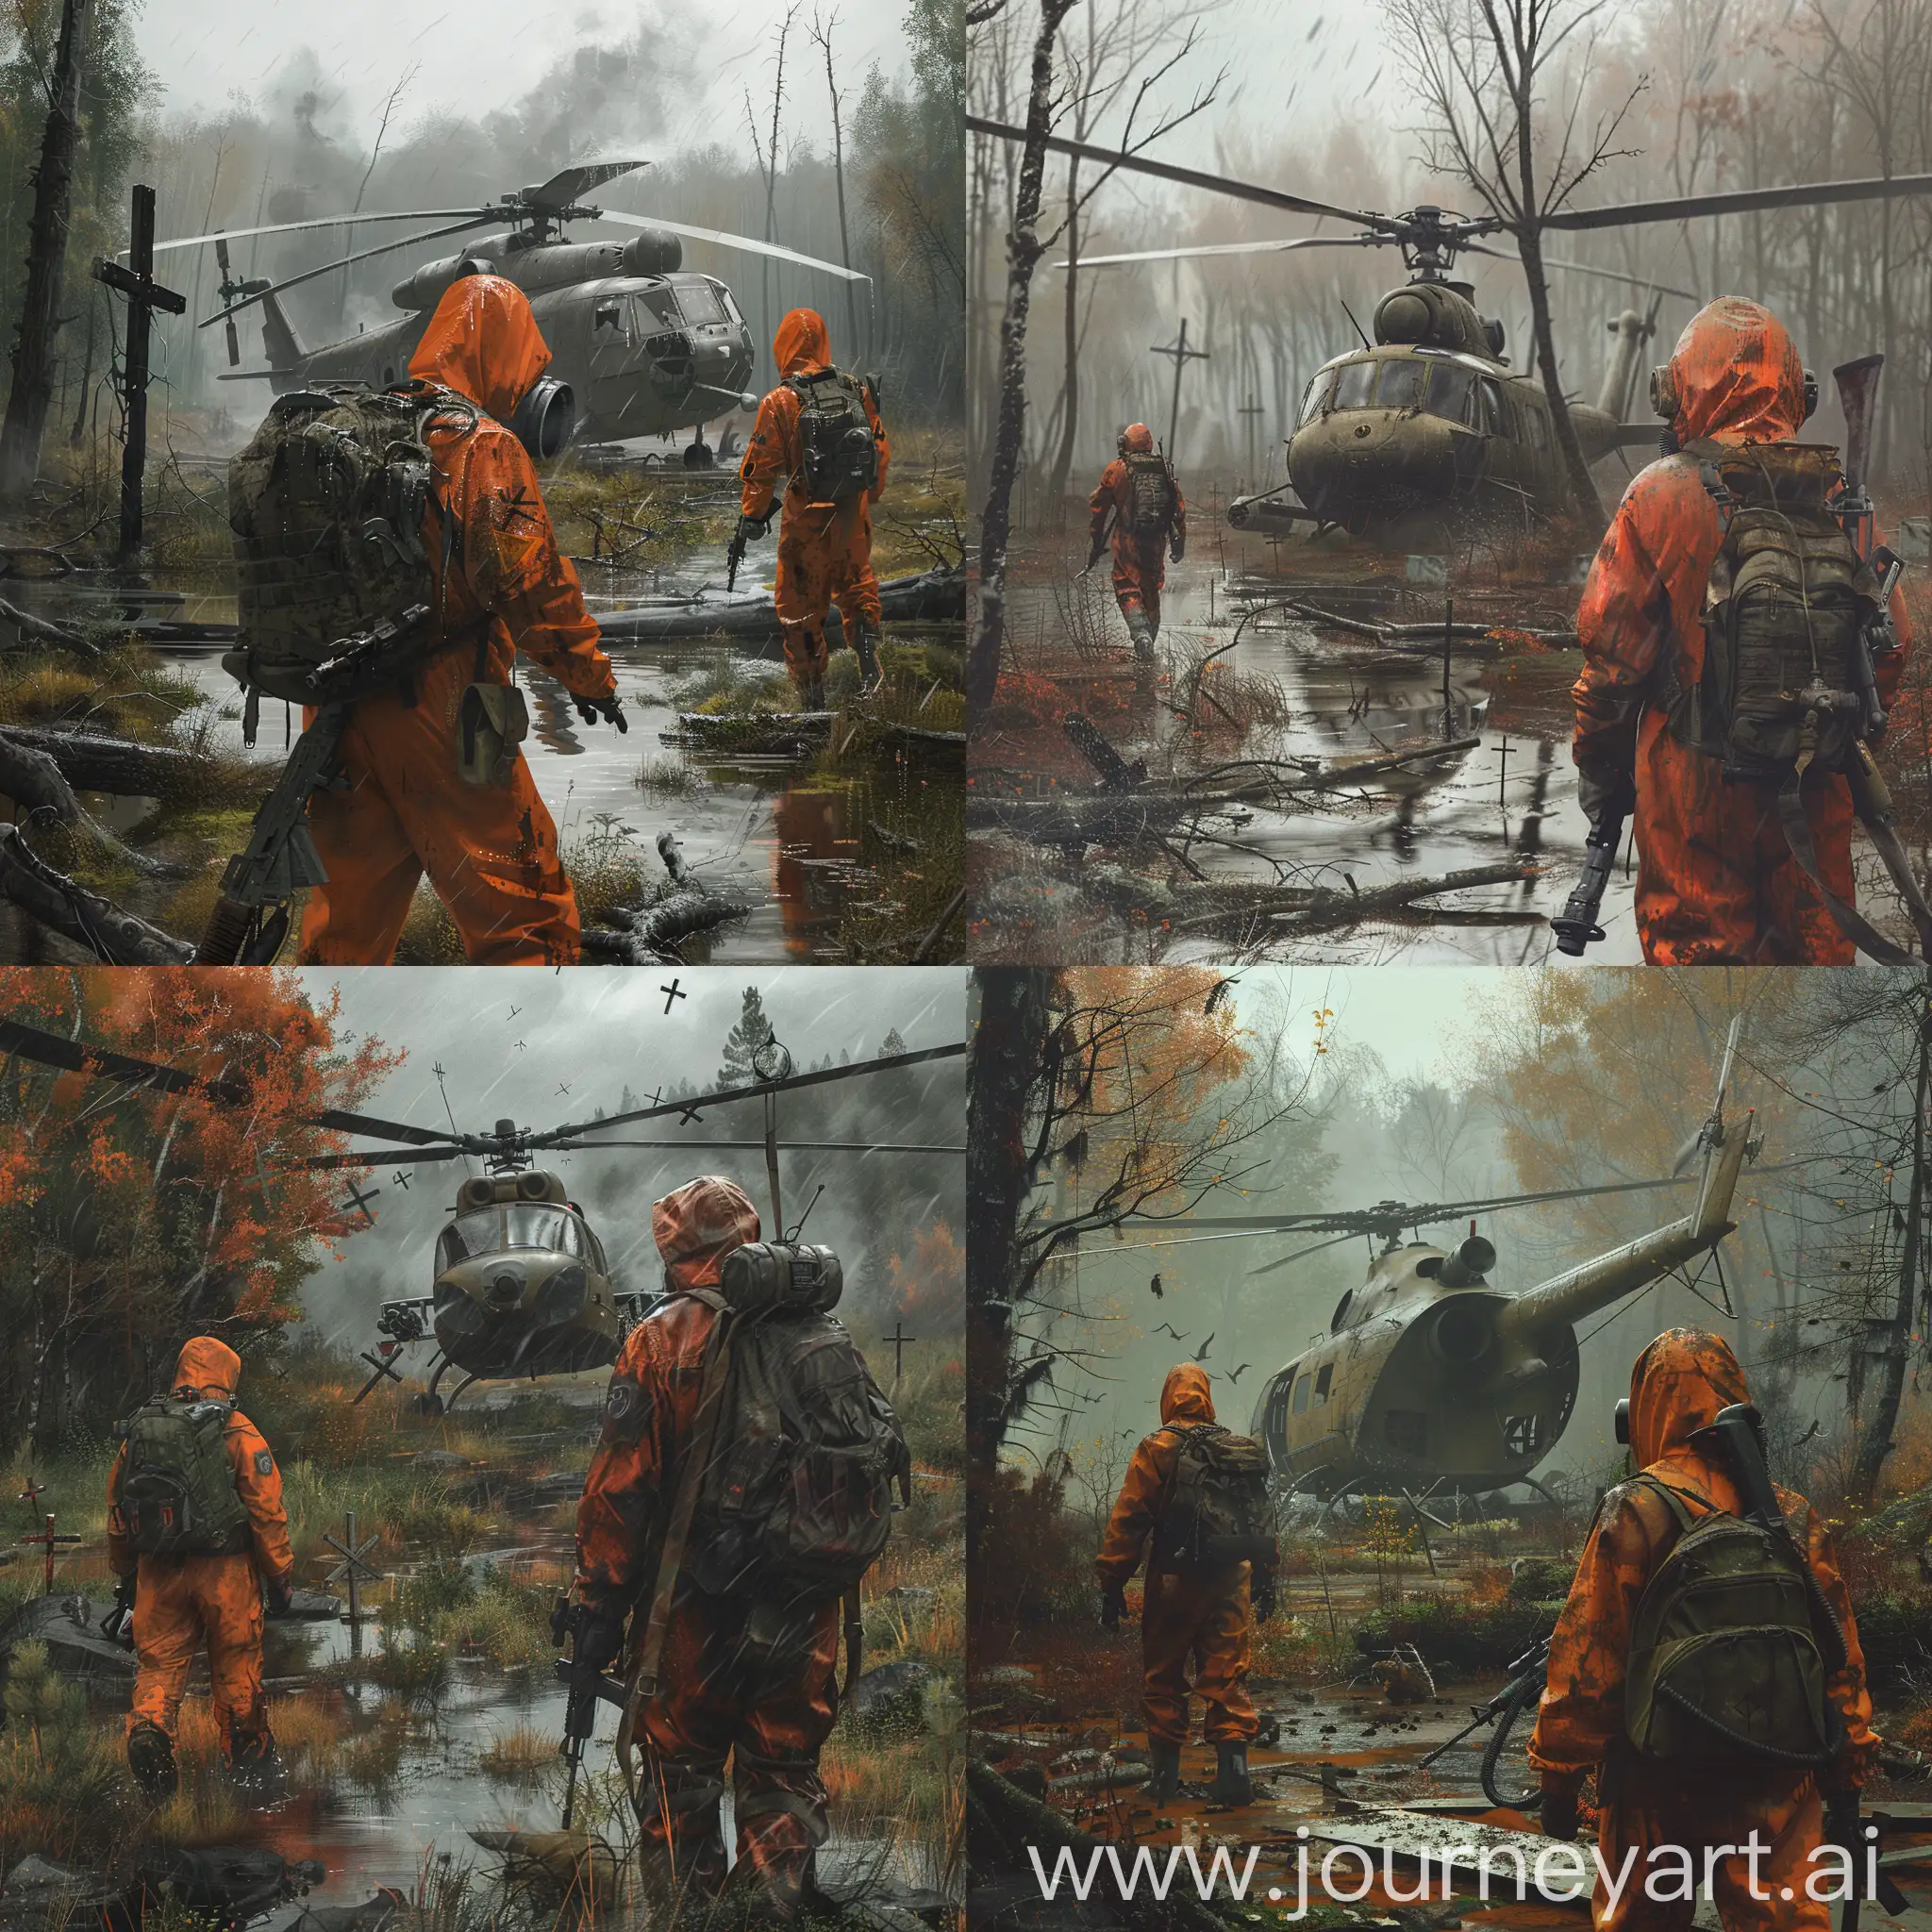 Anandoned soviet radiation swamp, crosses are everywhere, a tree has swallowed up a destroyed military helicopter, two stalkers are making their way to the helicopter, one is wearing an orange chemical protective jumpsuit with a gasmask, the other is wearing a dark leather raincoat in front, he has a backpack on his back, gasmask on the face and a sniper rifle in his hand, the weather is gloomy autumn.